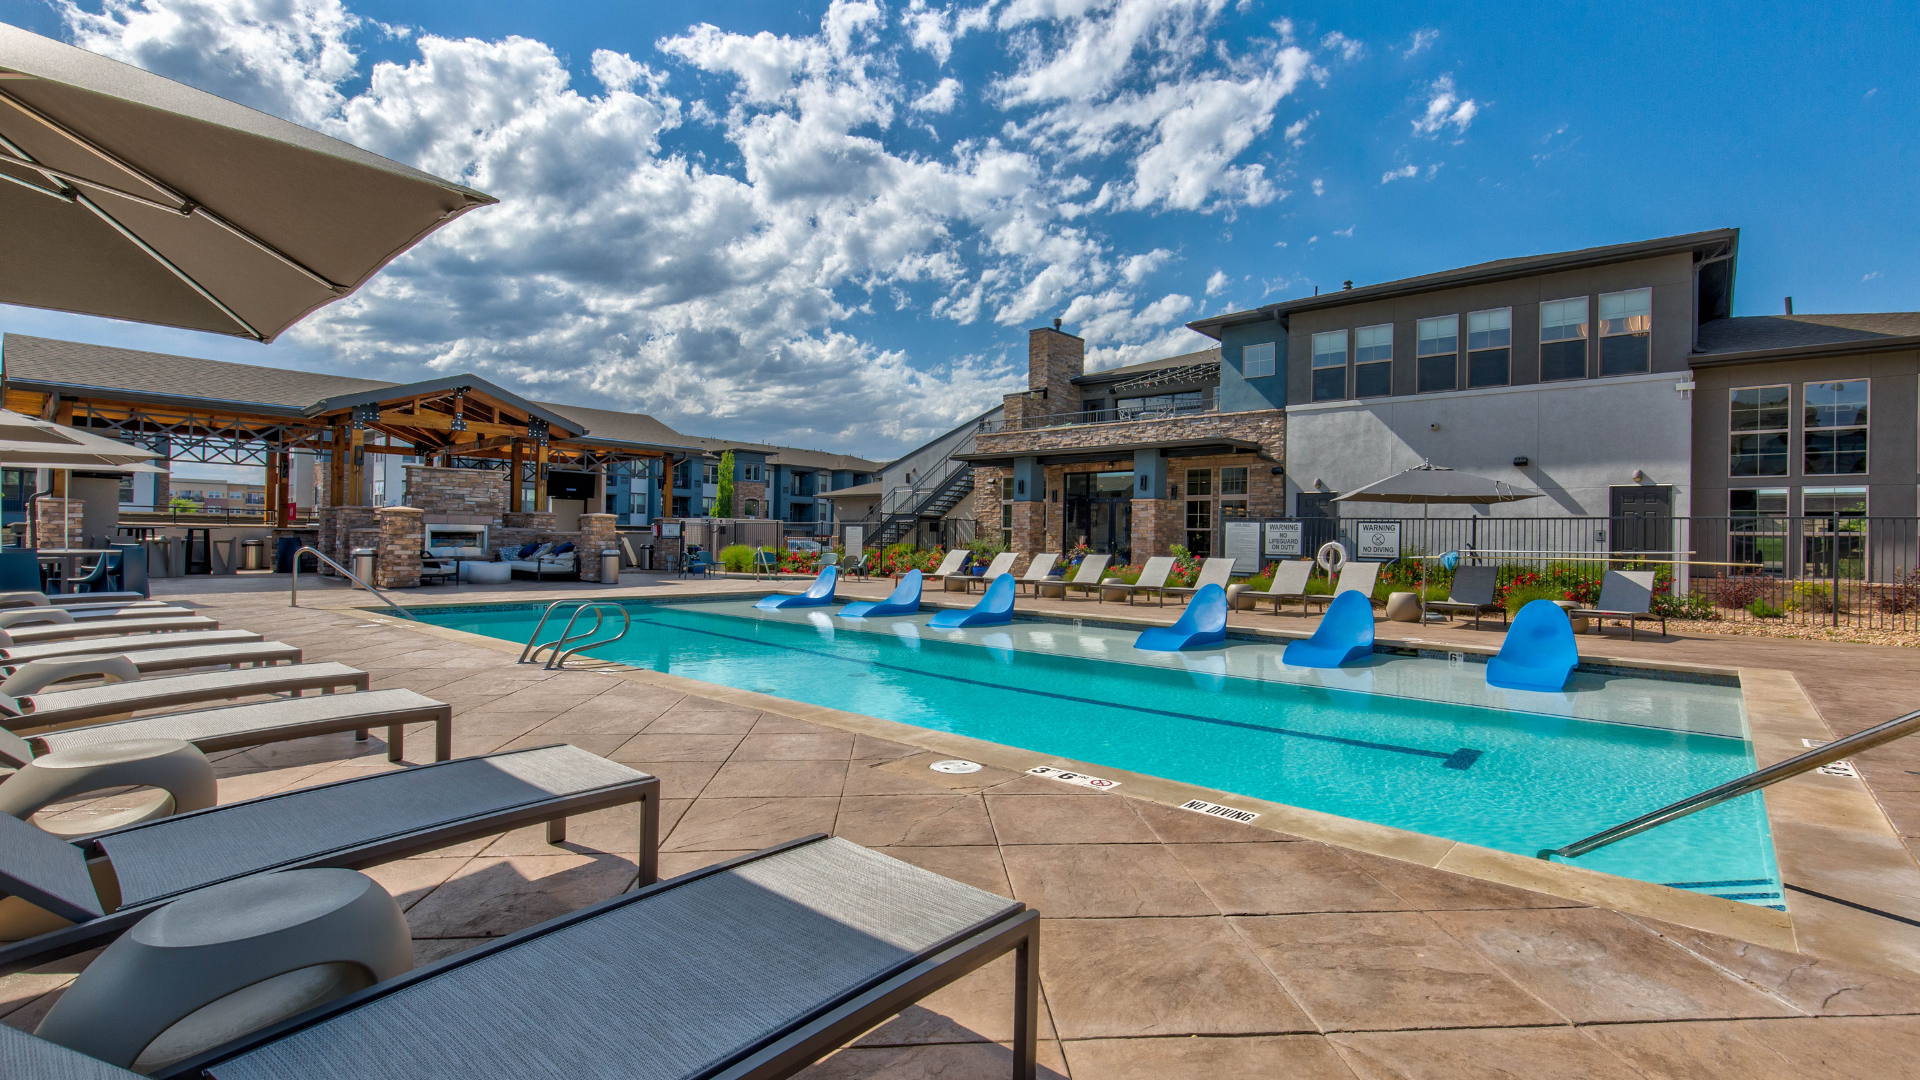 Resort-Style Pool and Sun Deck at Our Johnstown Colorado ApartmentsResort-Style Pool and Sun Deck at Our Johnstown Colorado Apartments